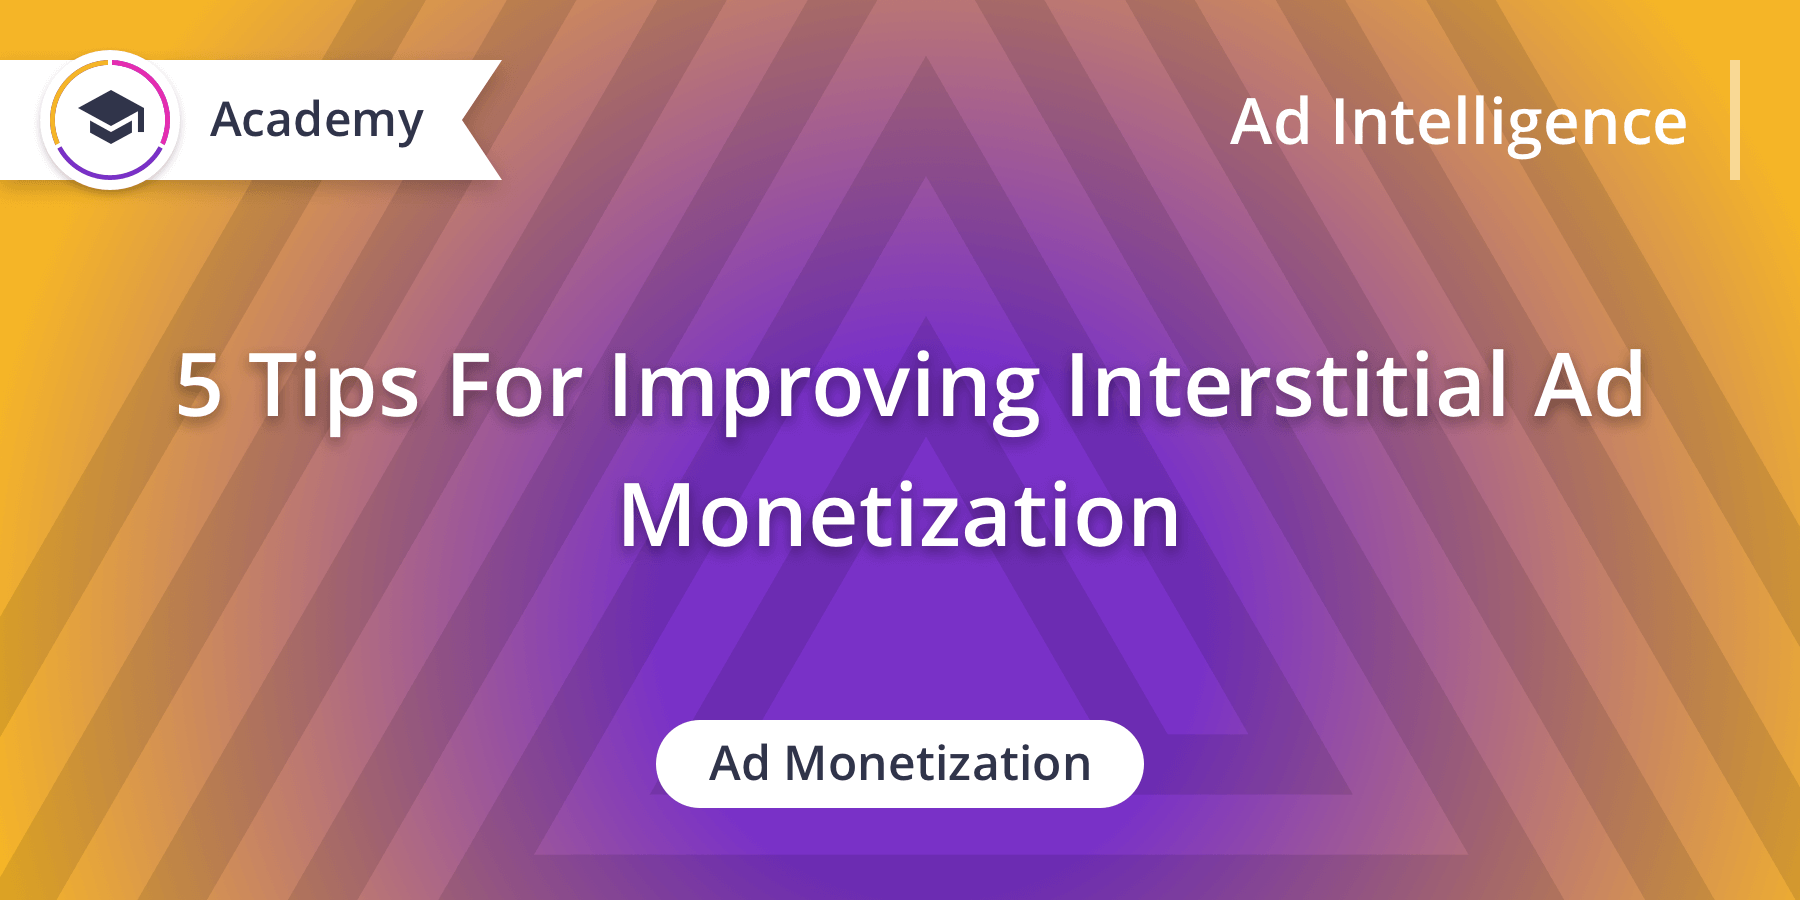 5 Tips for Improving Interstitial Ad Monetization